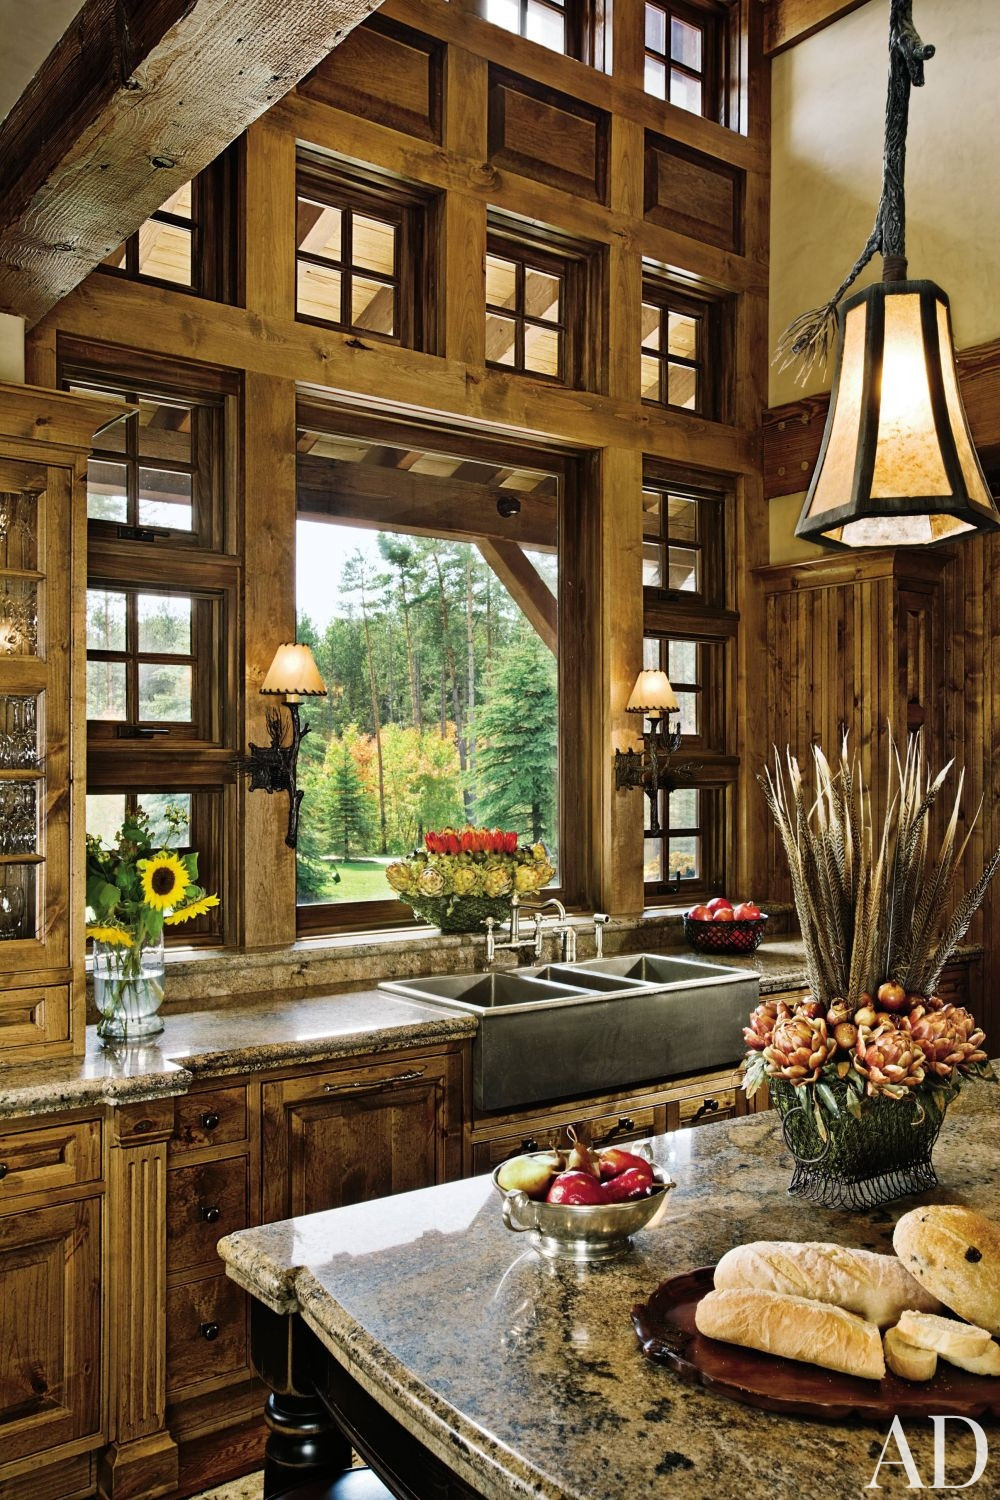 Rustic Kitchen Decor
 How to Introduce Rustic Style to Your Home